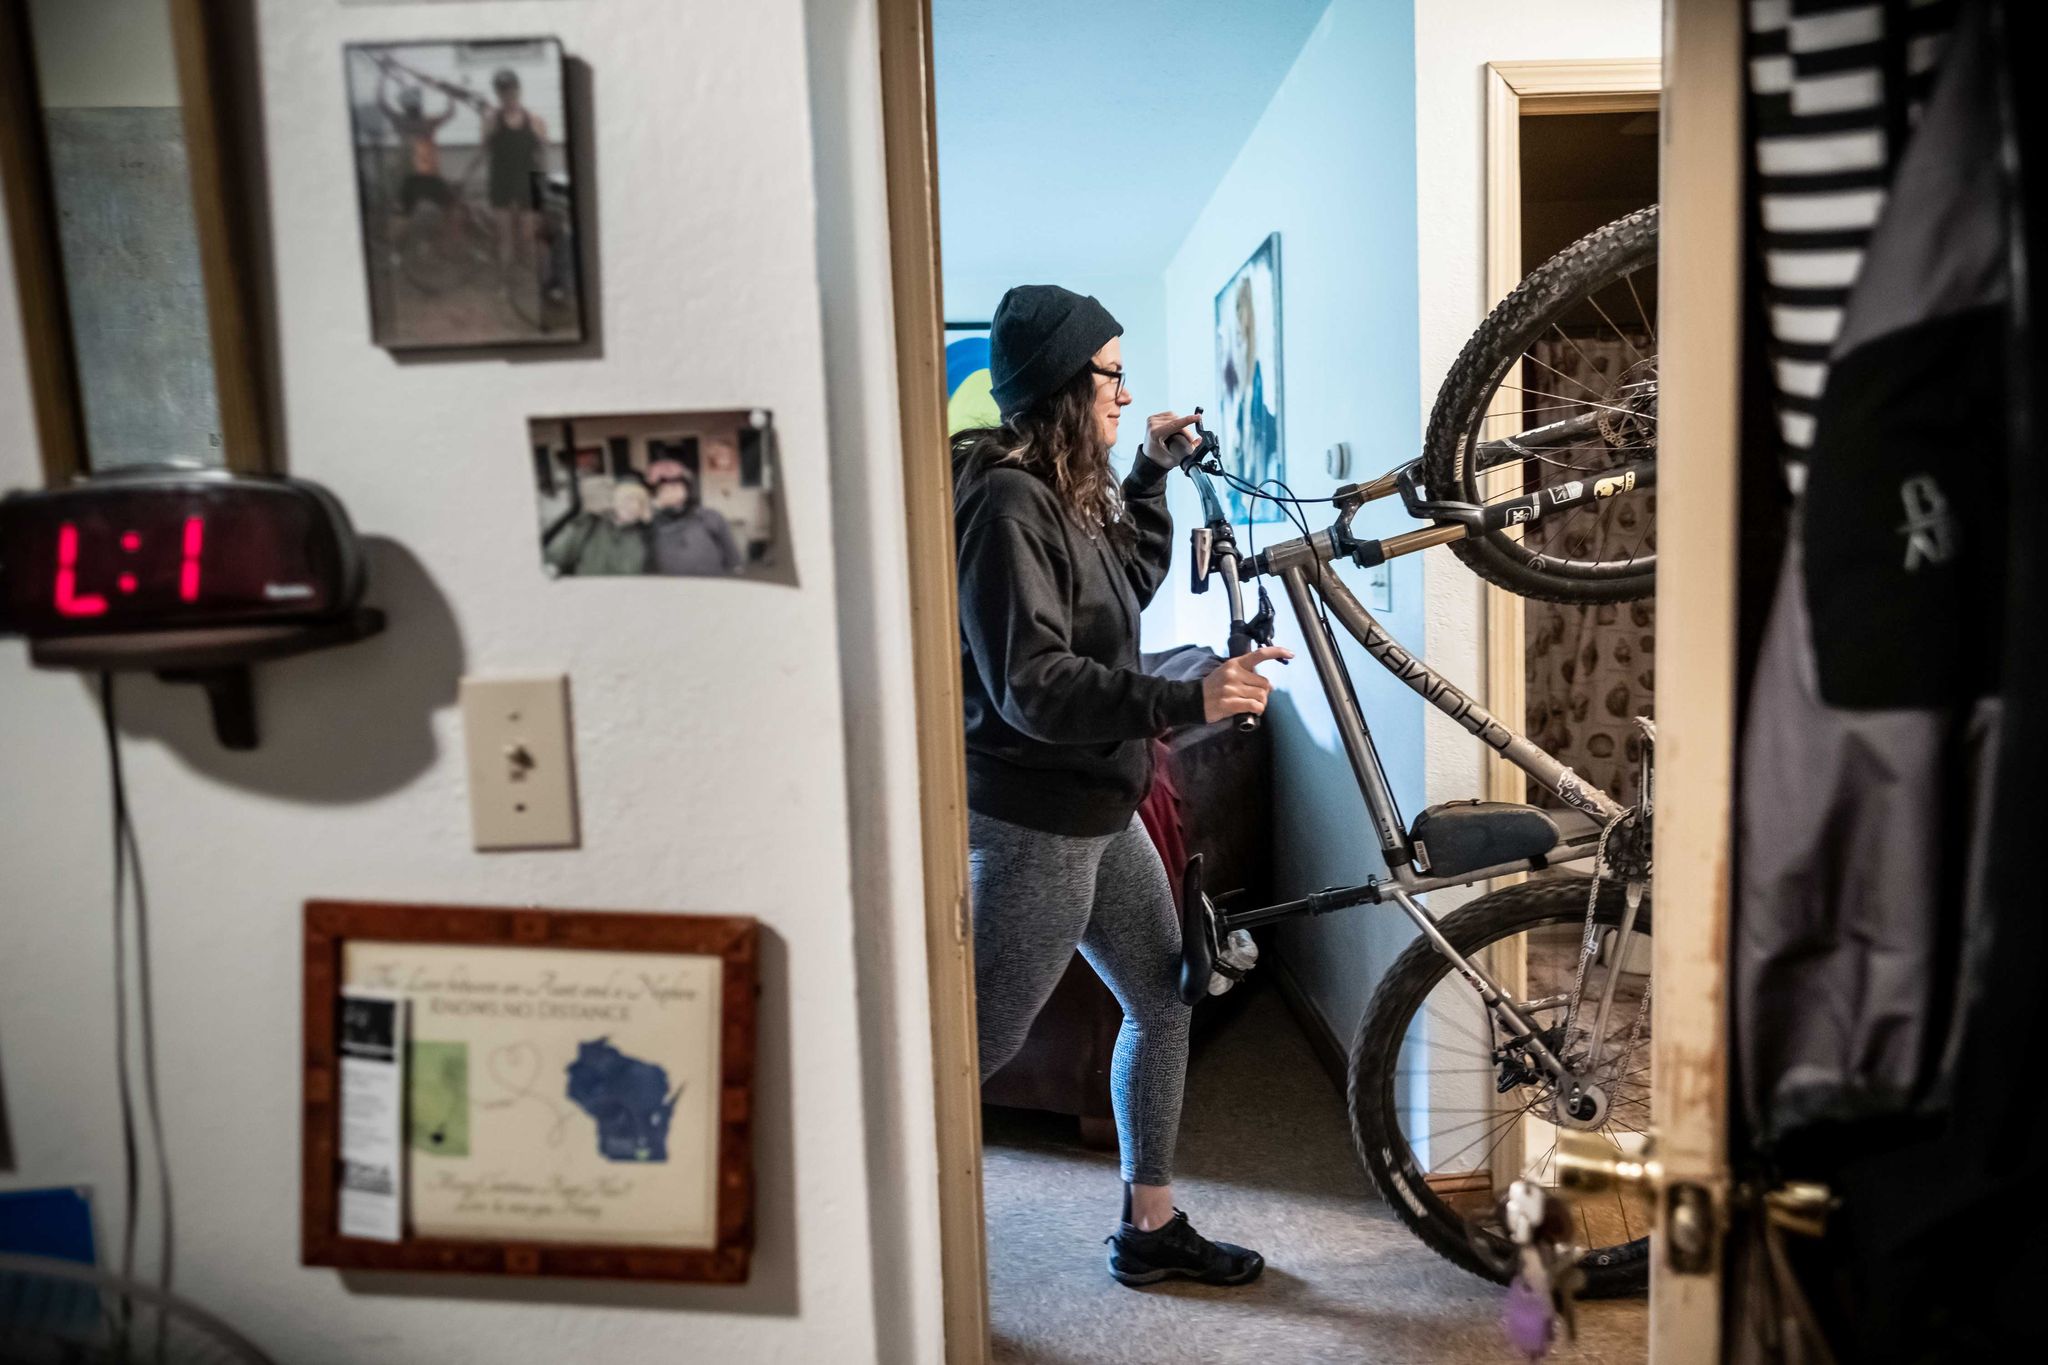 Alexandera Houchin wheels her bike out of her room in preparation for a ride in Cloquet, MN on October 22, 2019.